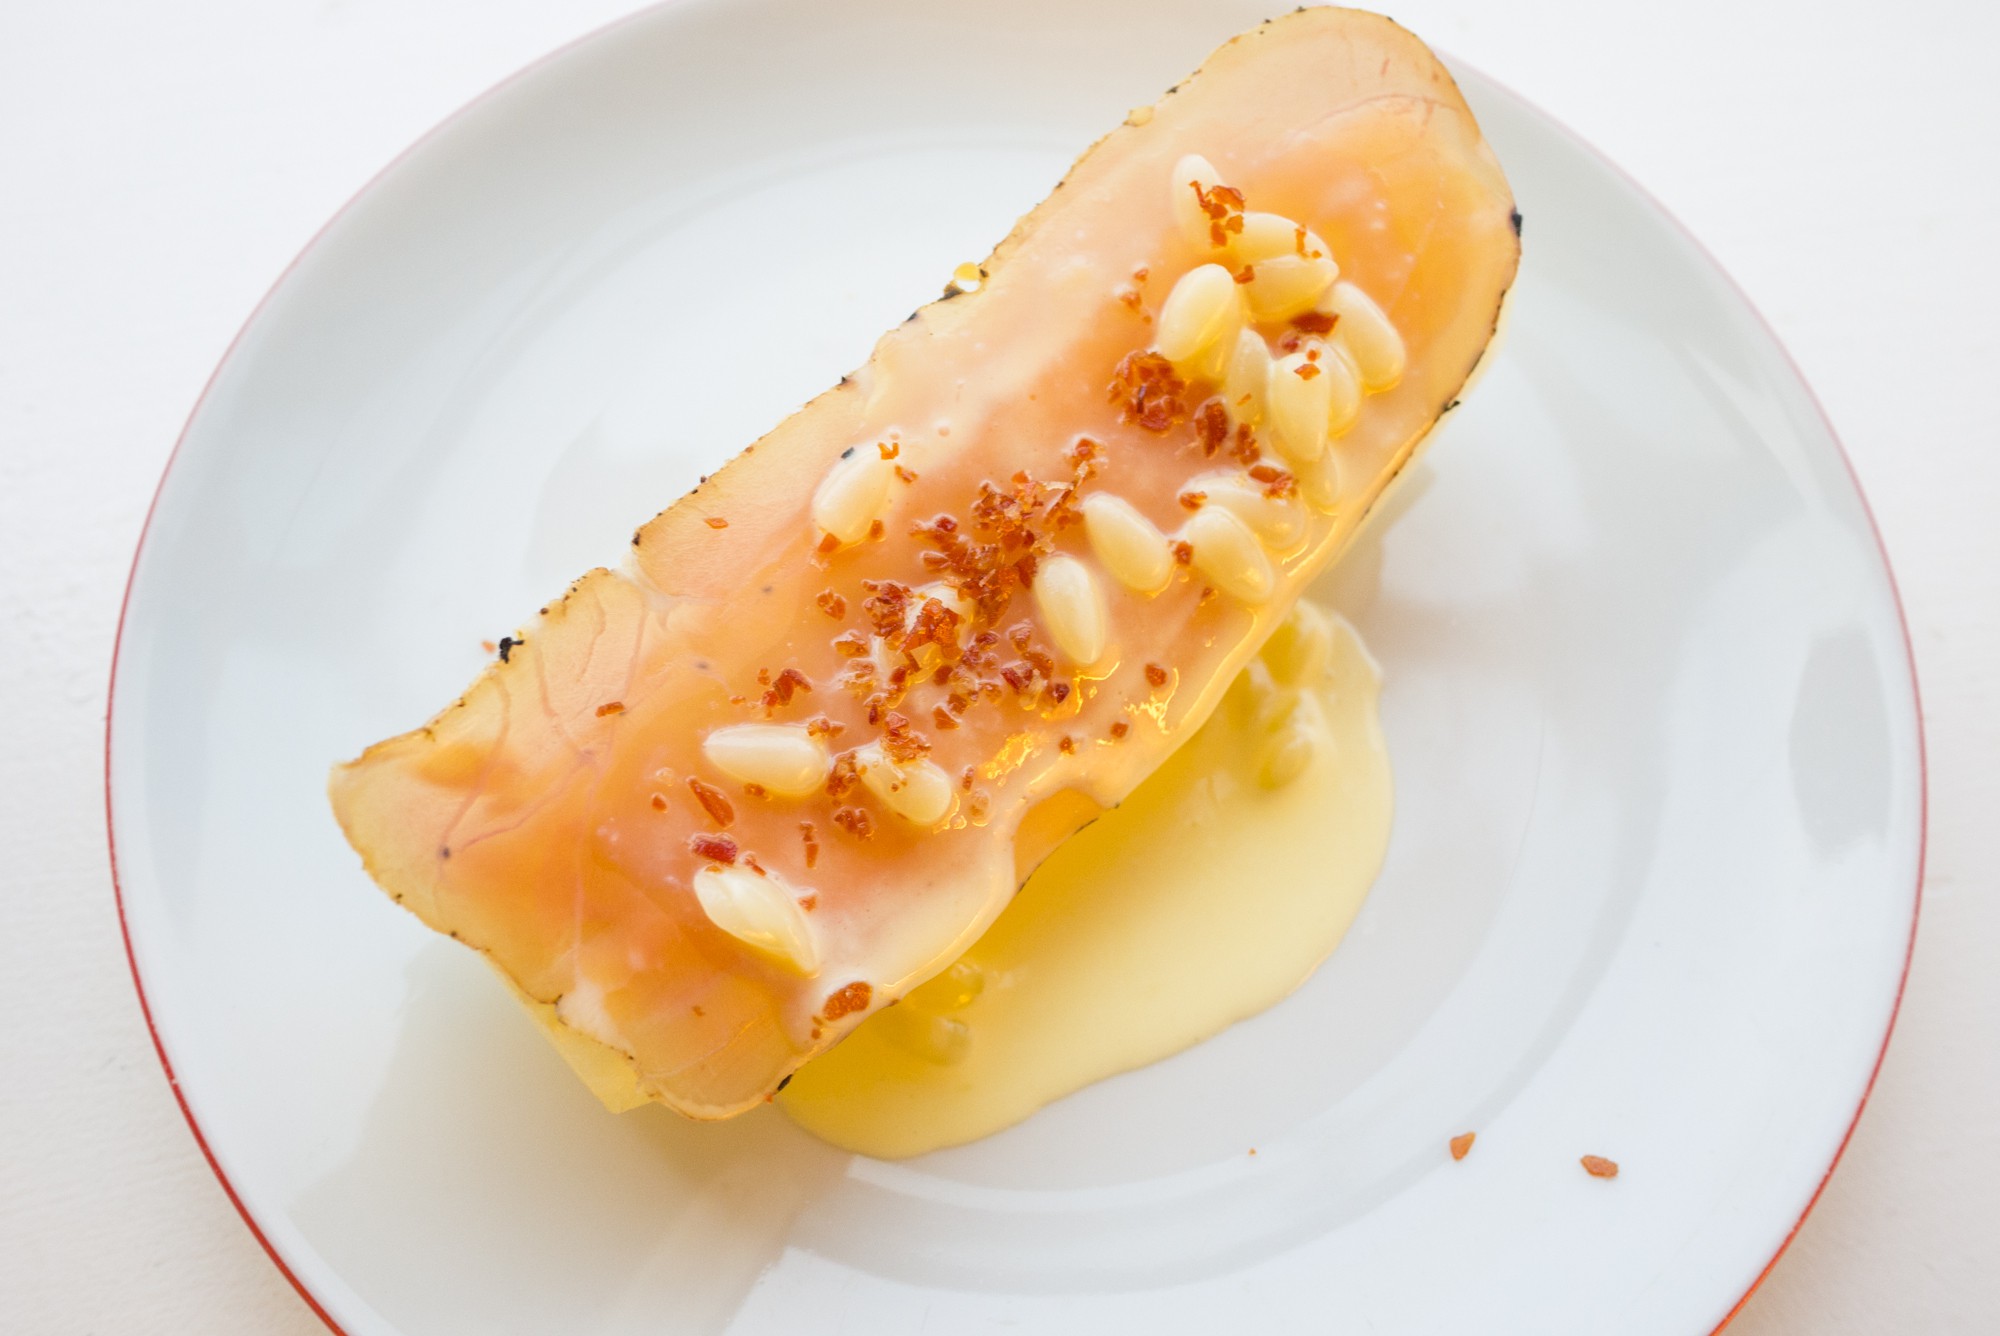 Yellow melon, ham infused cream and salt & edible seeds